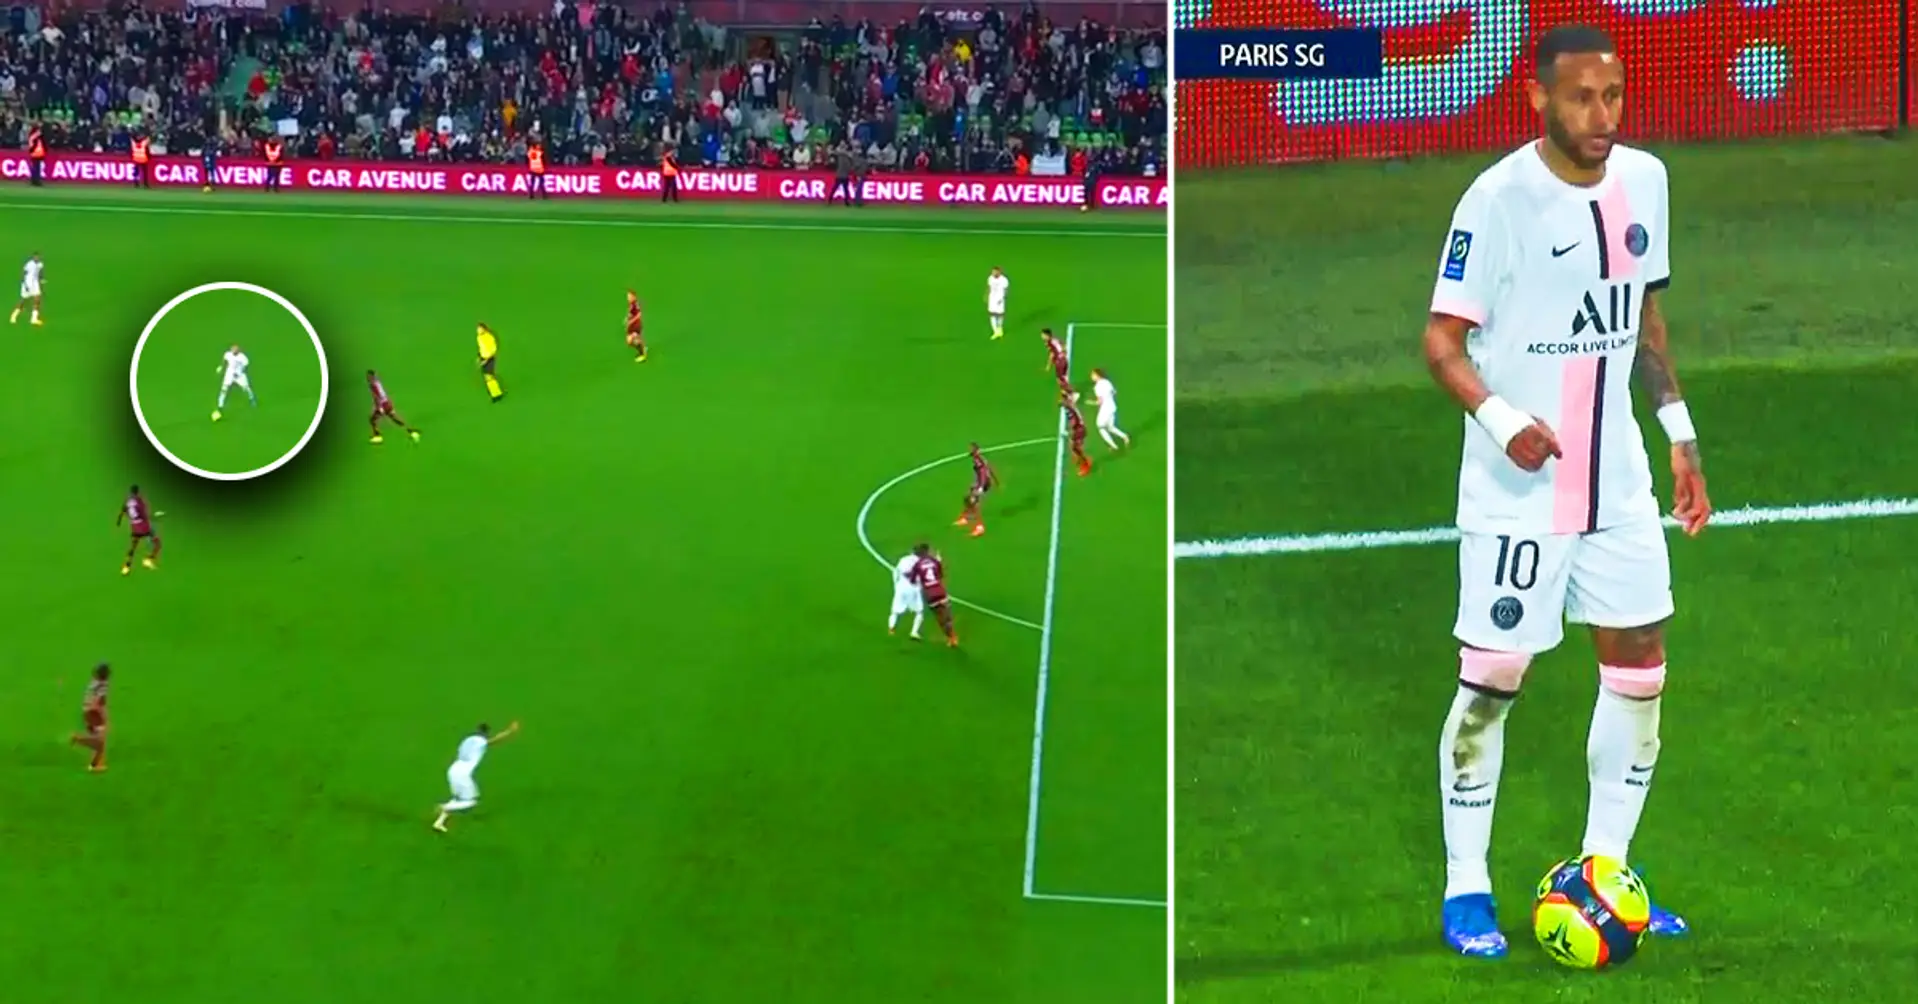 Achraf Hakimi turns into Dani Alves, scores incredible winner for PSG after Neymar’s assist